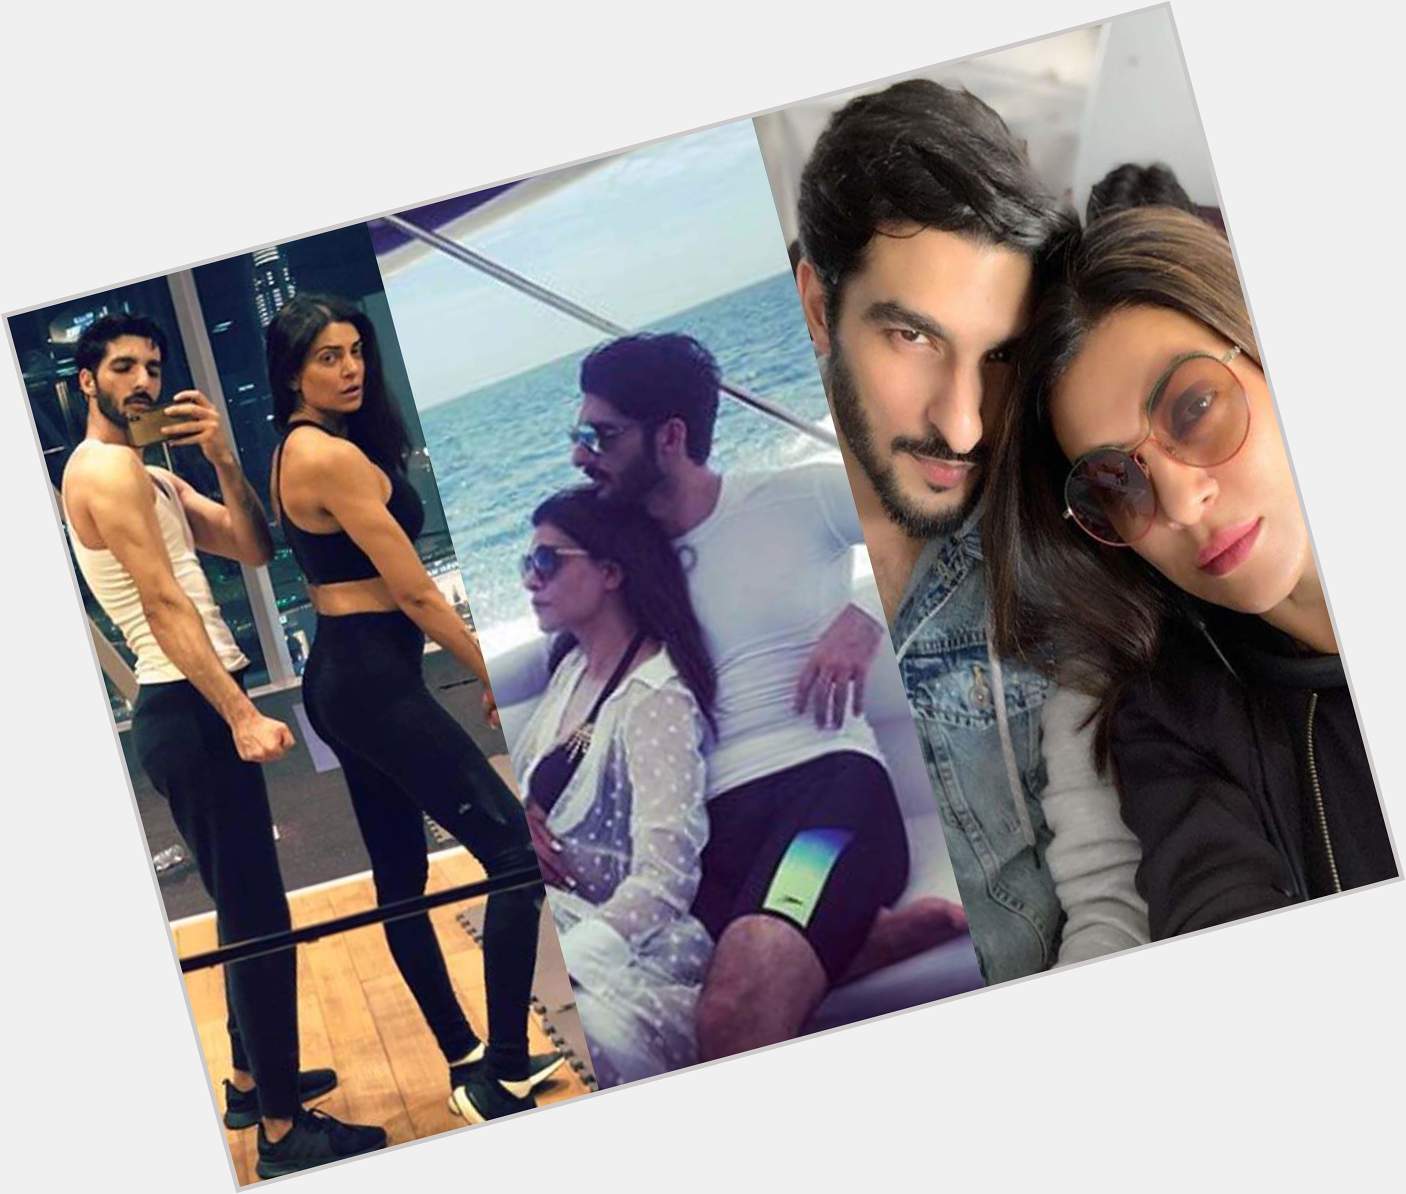 Happy Birthday Sushmita Sen: Take a look at her pictures with her beau Rohman Shawl  